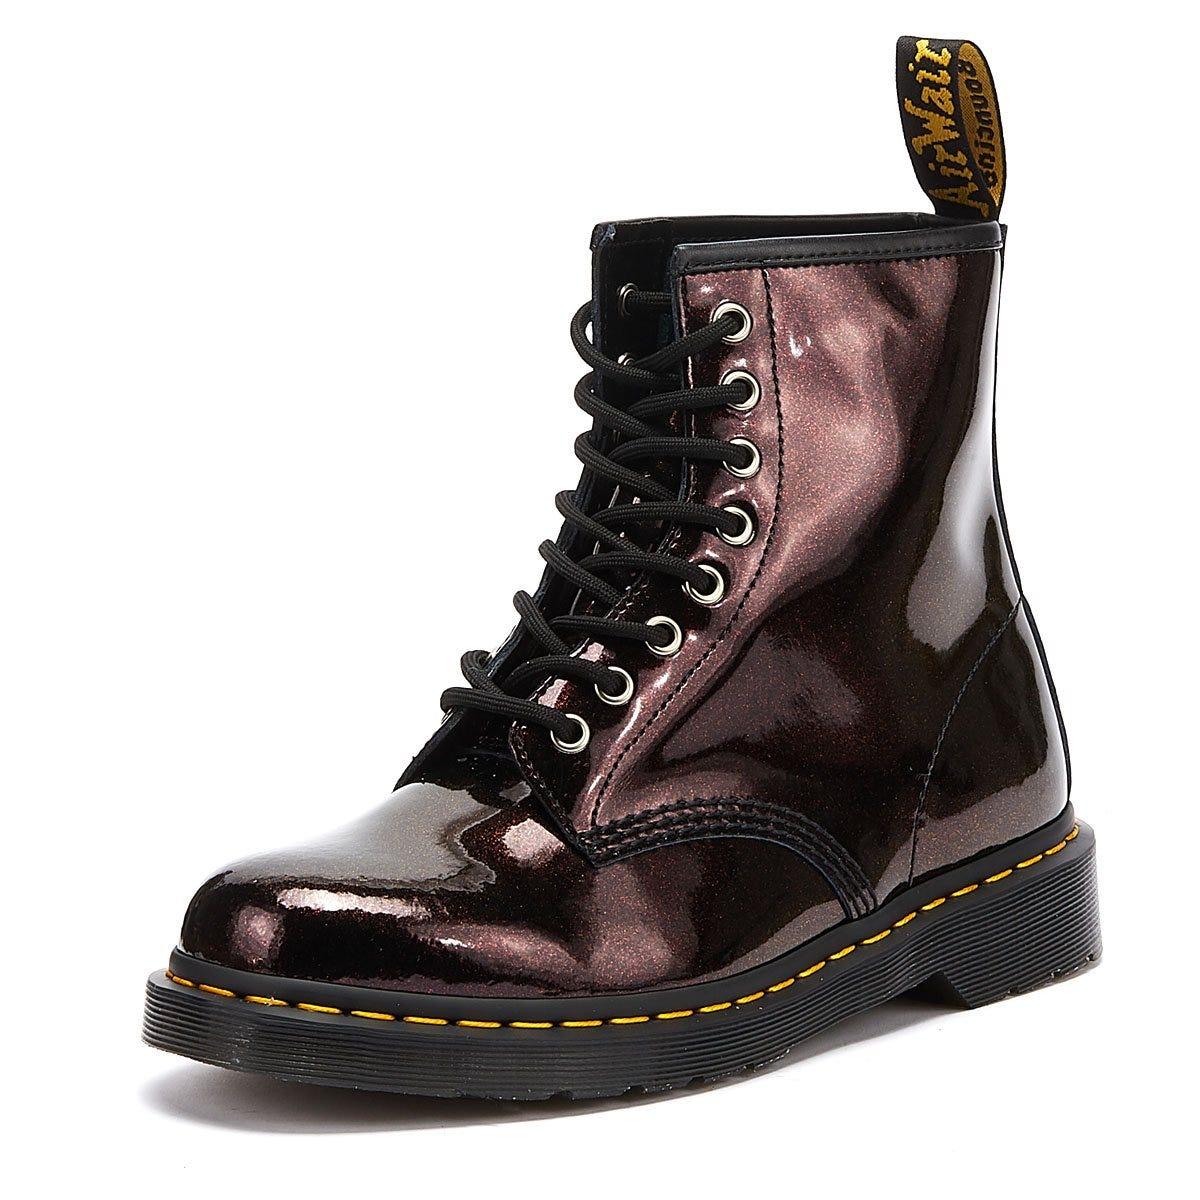 Dr. Martens Leather 1460 8-eye Sparkle Boots in Purple - Lyst